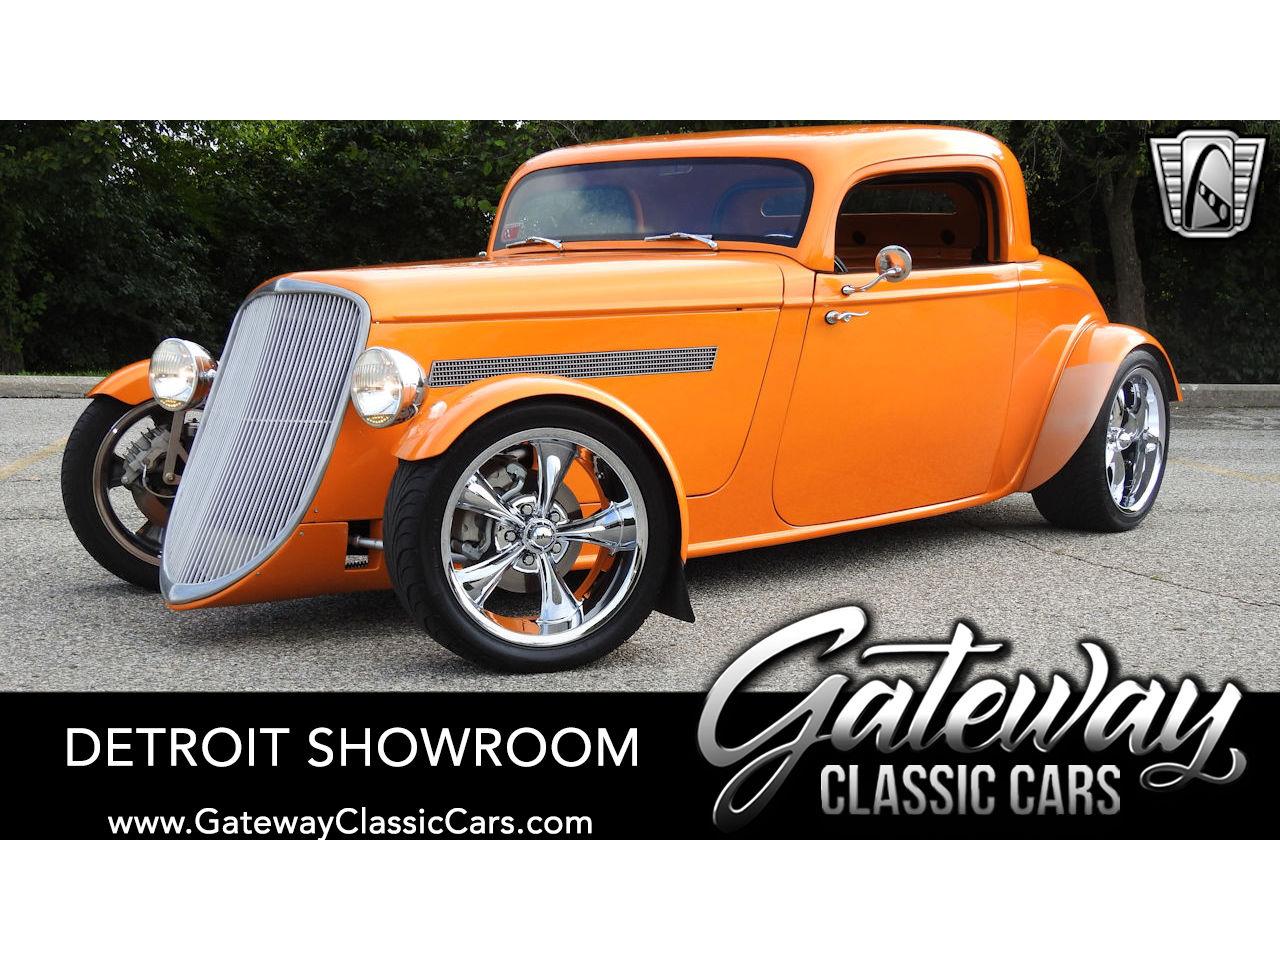 Sunset Pearl 1933 Ford Coupe for sale located in O'Fallon, Illinois...